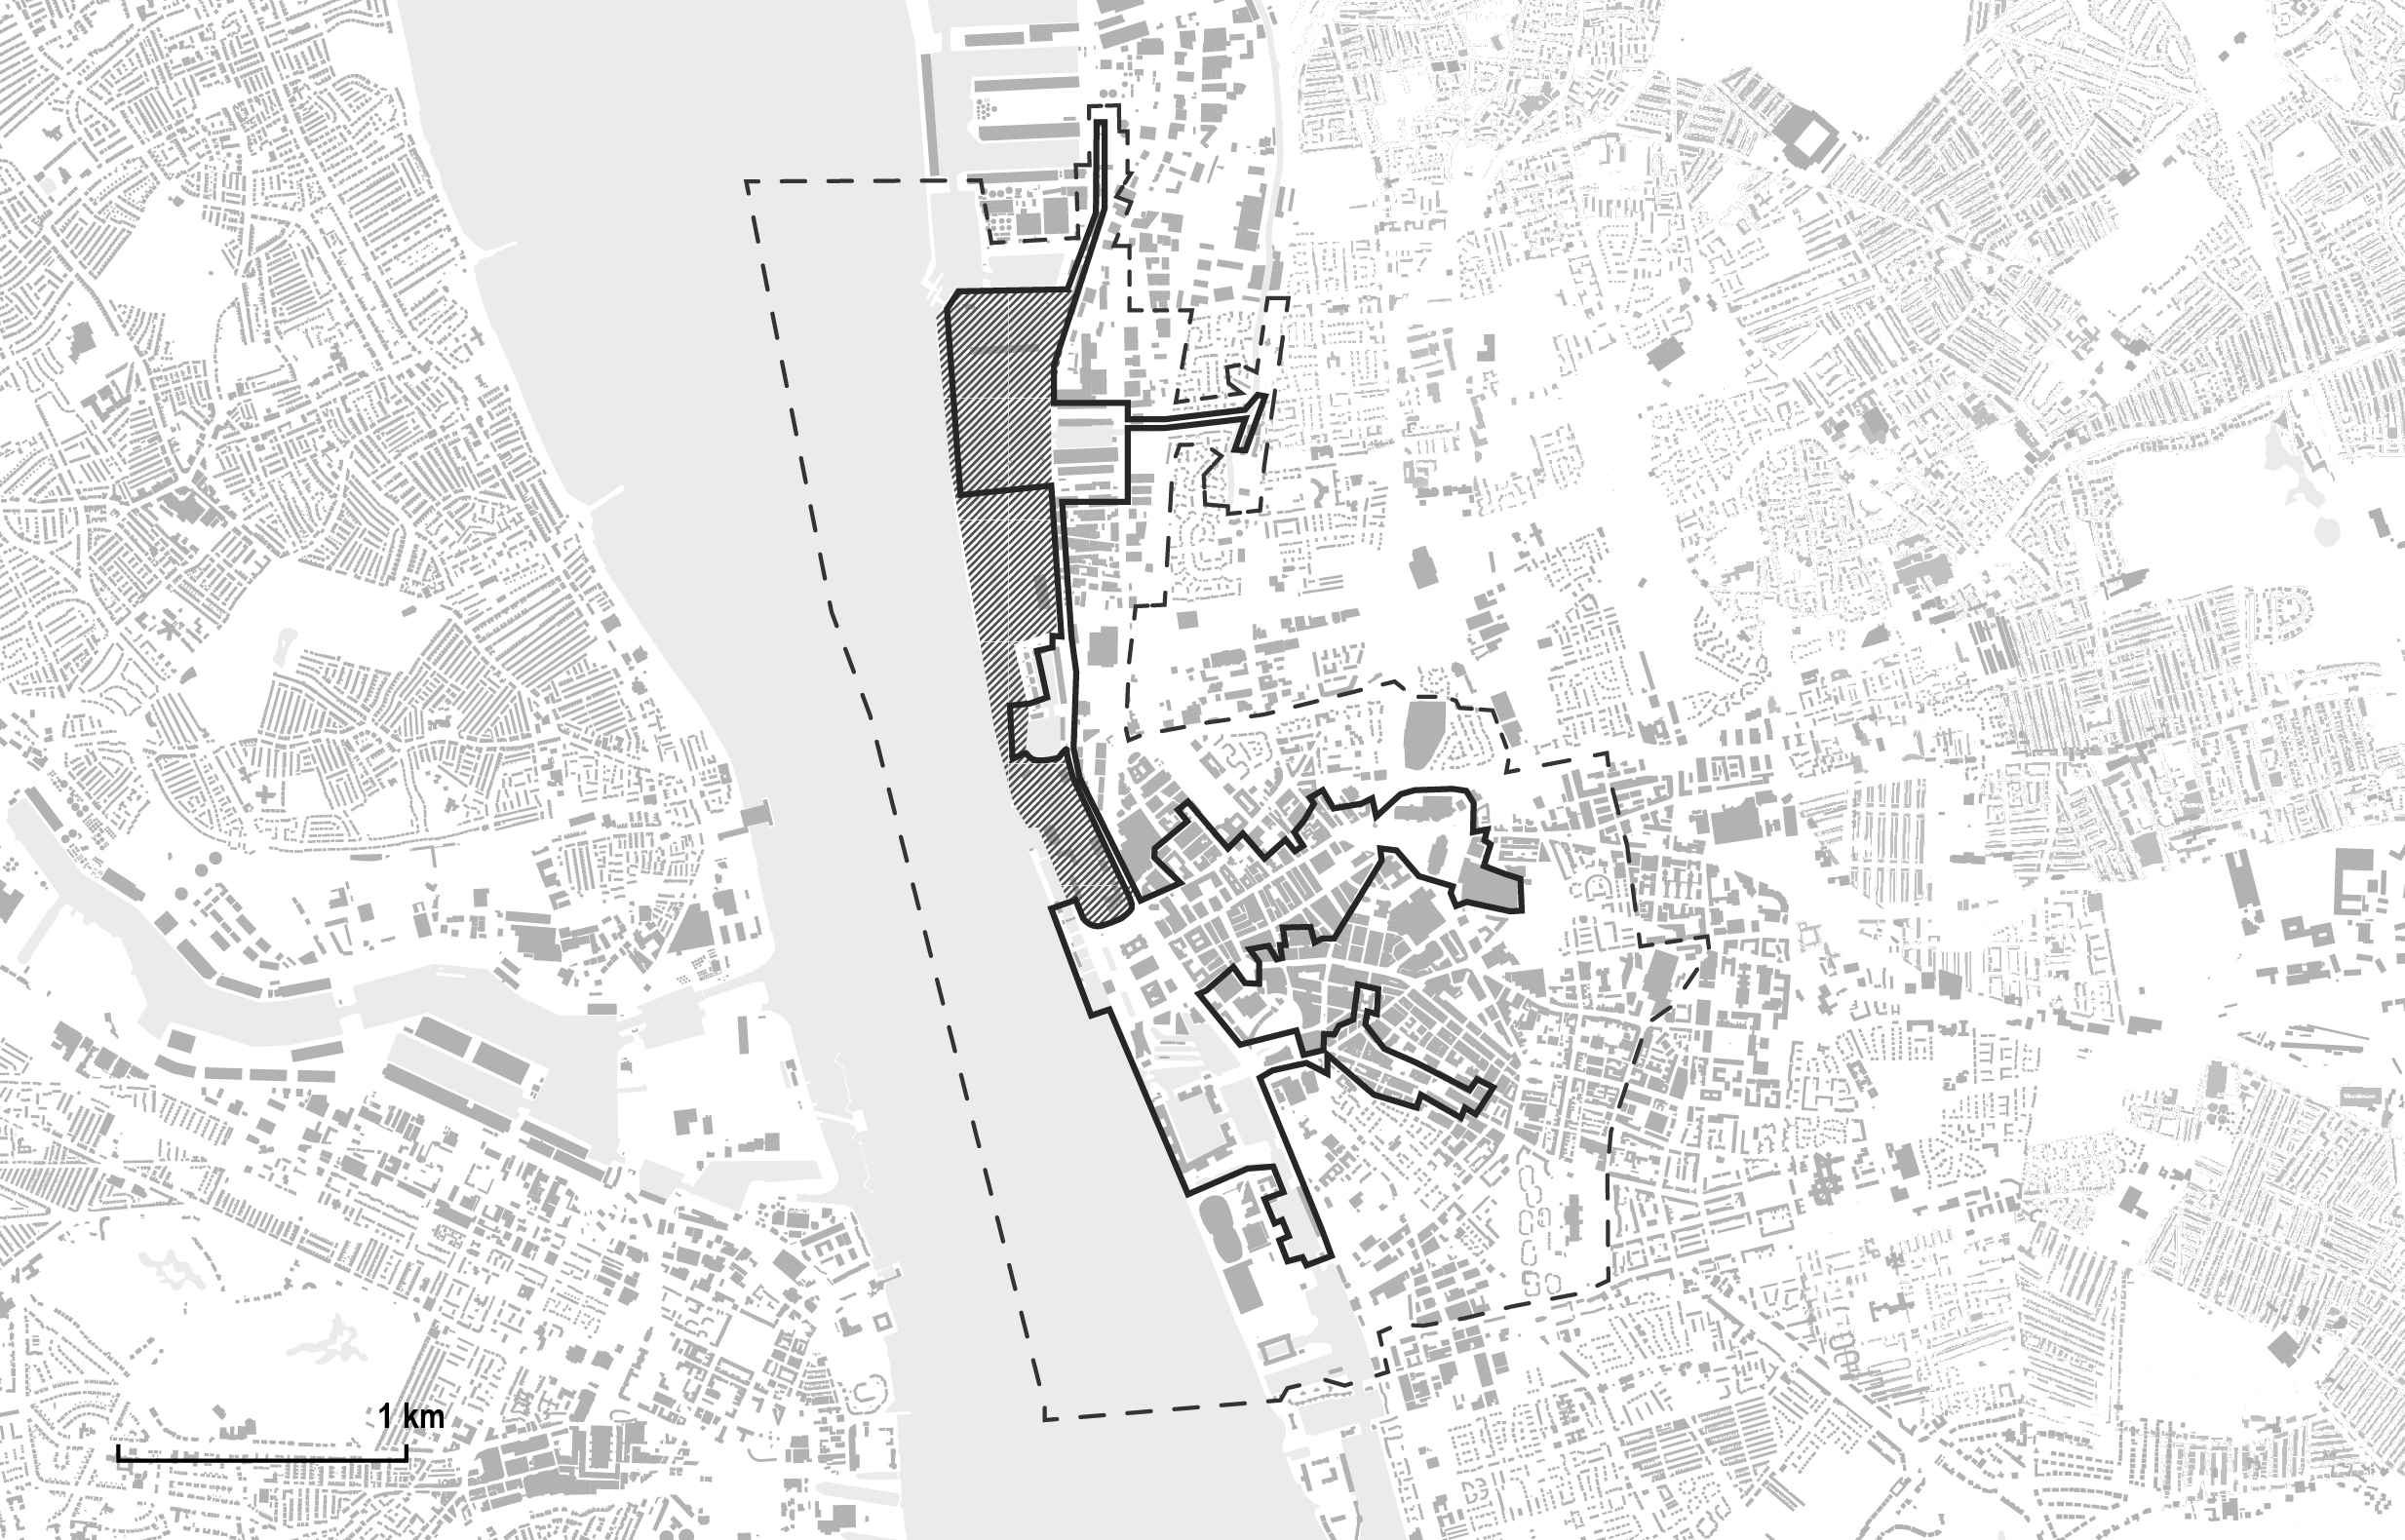 Map showing the boundary of the Liverpool Waters development (grey dash) overlapping the Liverpool UNESCO World Heritage Site (solid black line) and buffer zone (black dash line) (source: Jones, 2020).